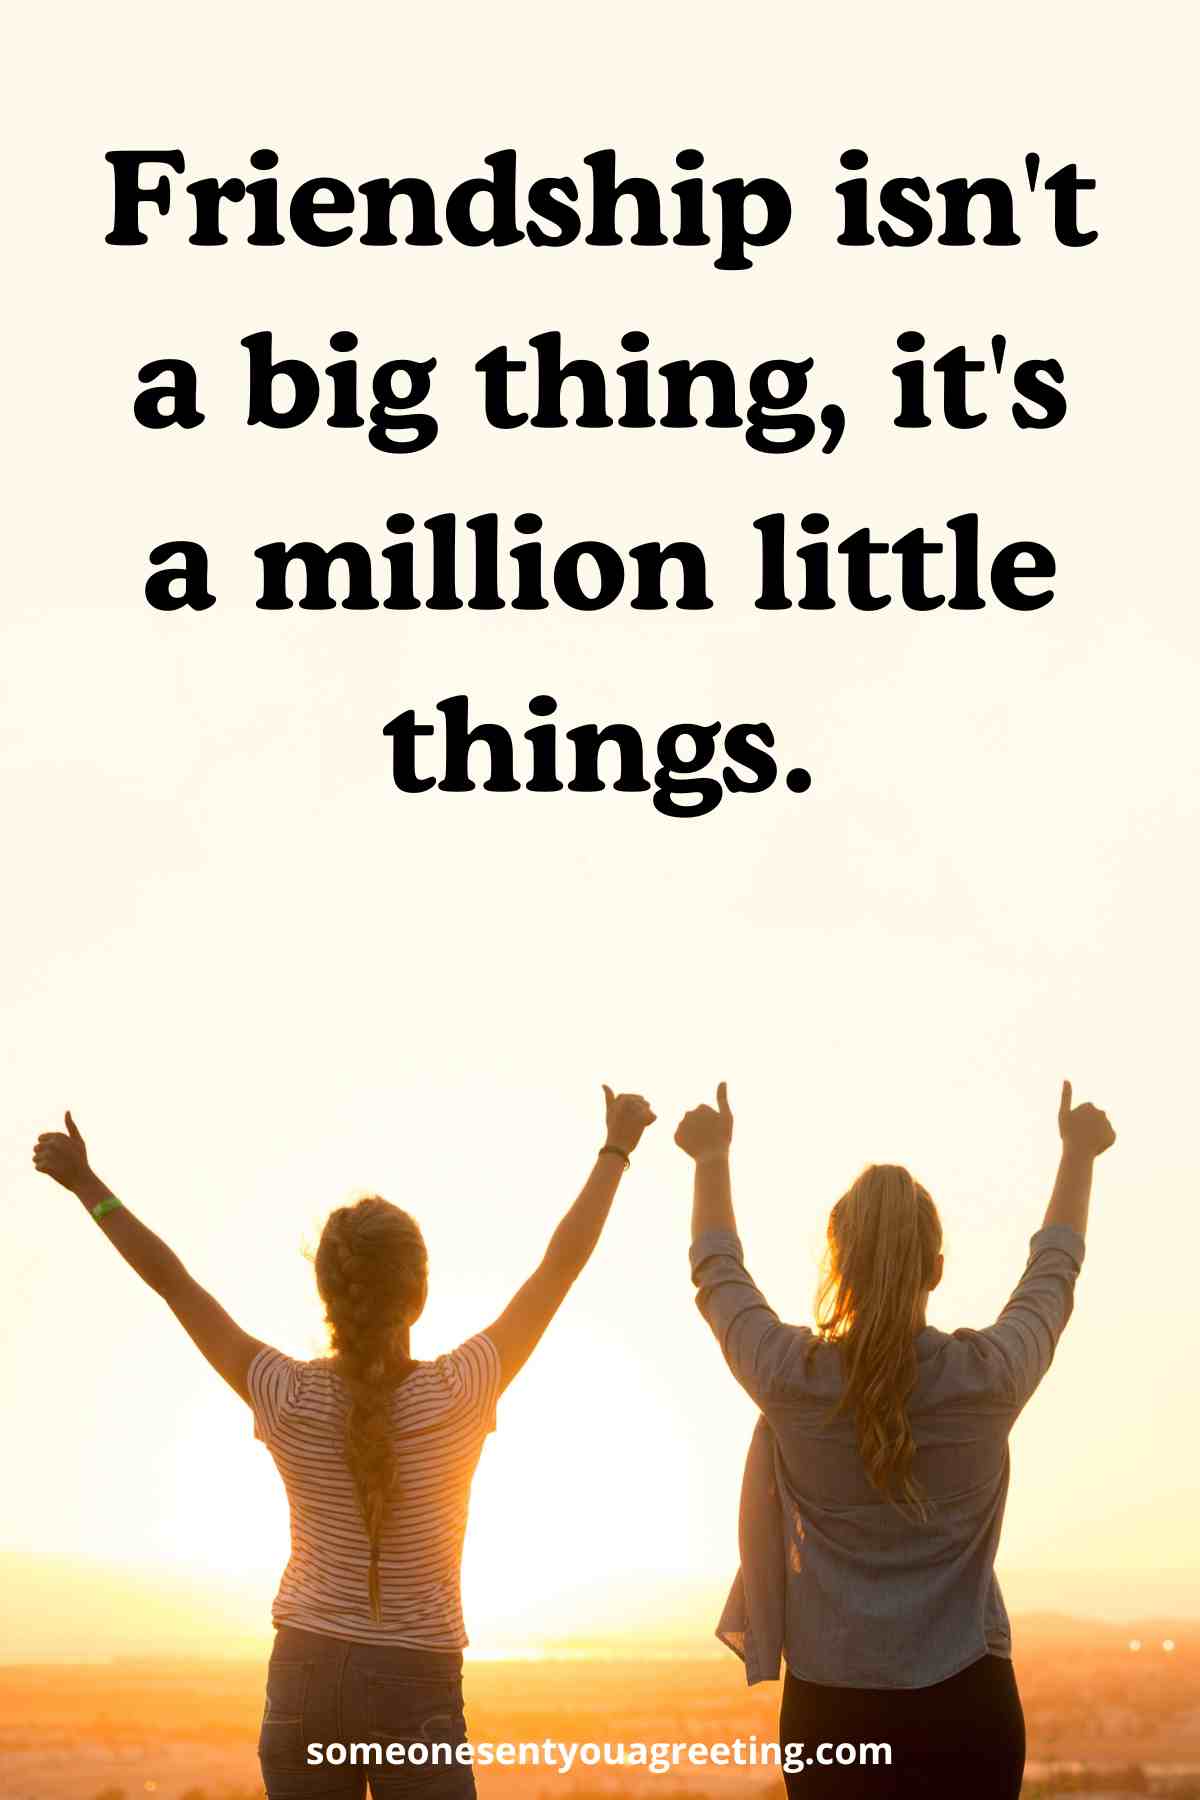 friendship is a million little things quote